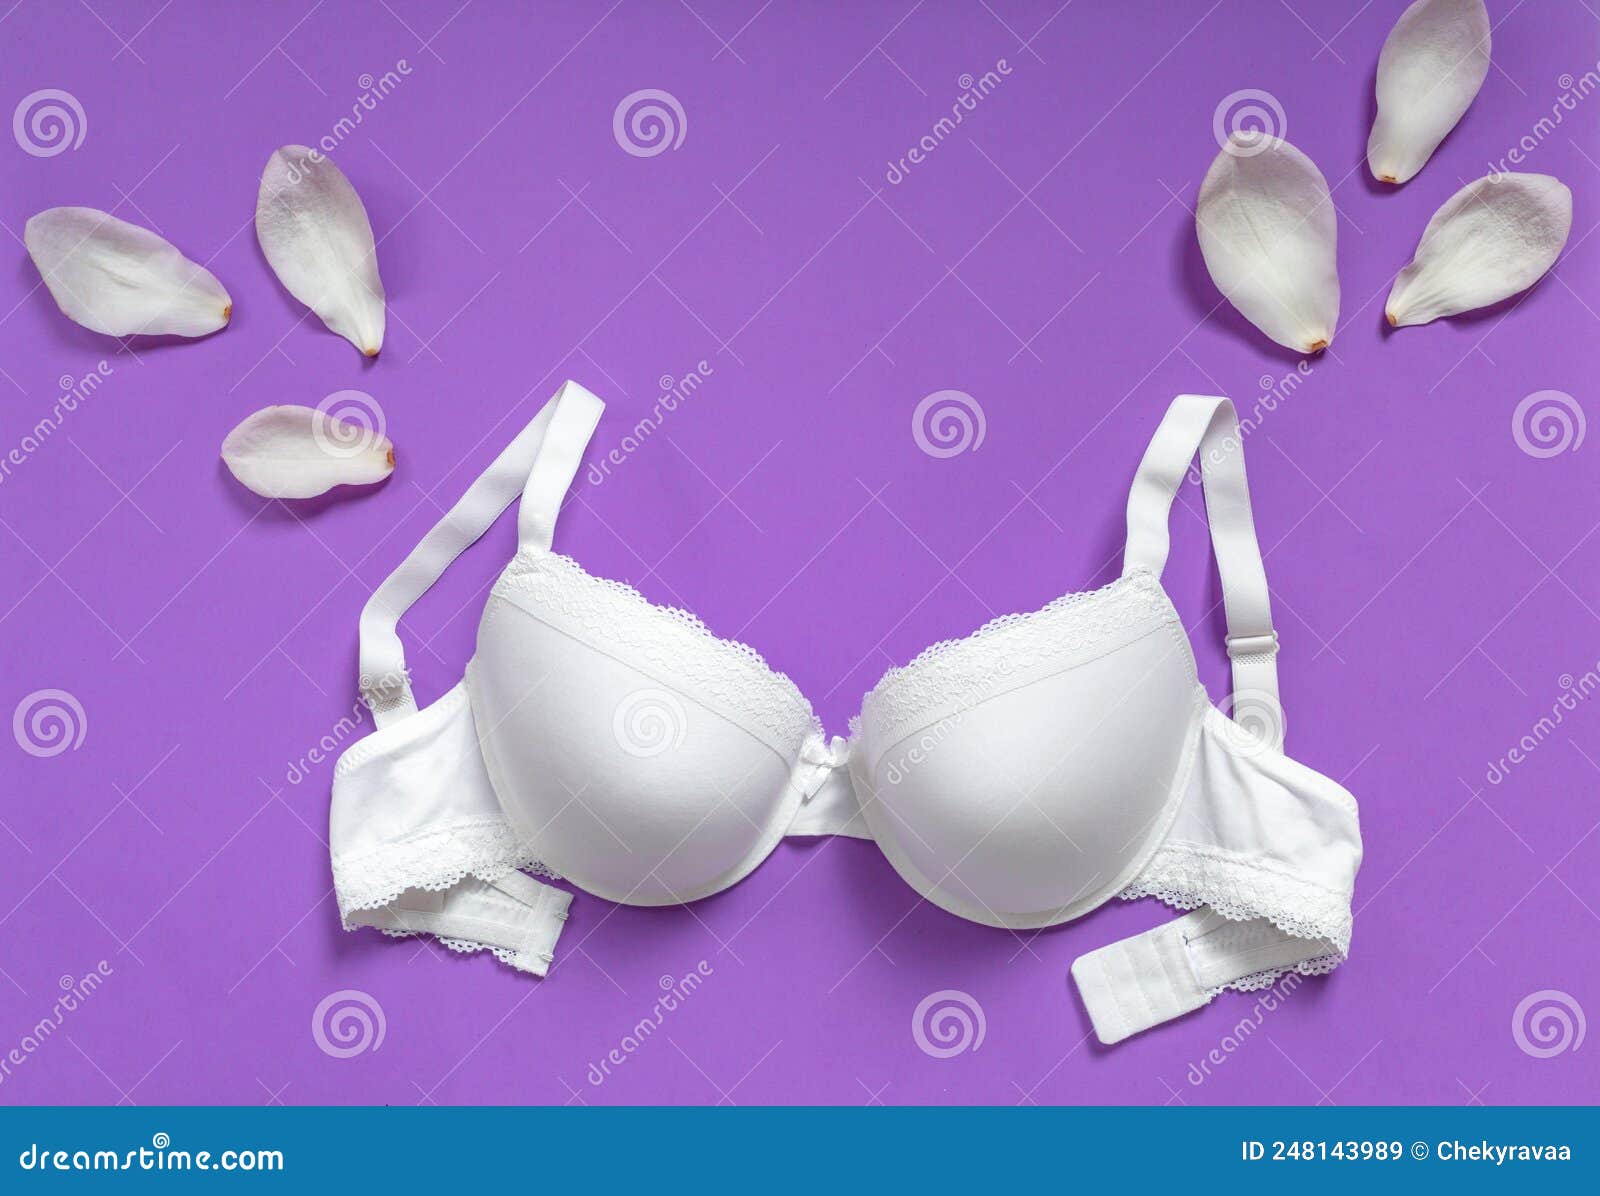 White New Bra on a Violet Background. Bra, Lace Lingerie on a Very Peri  Purple Background. Beauty Blog Concept. Top View, Stock Image - Image of  cloth, collection: 248143989